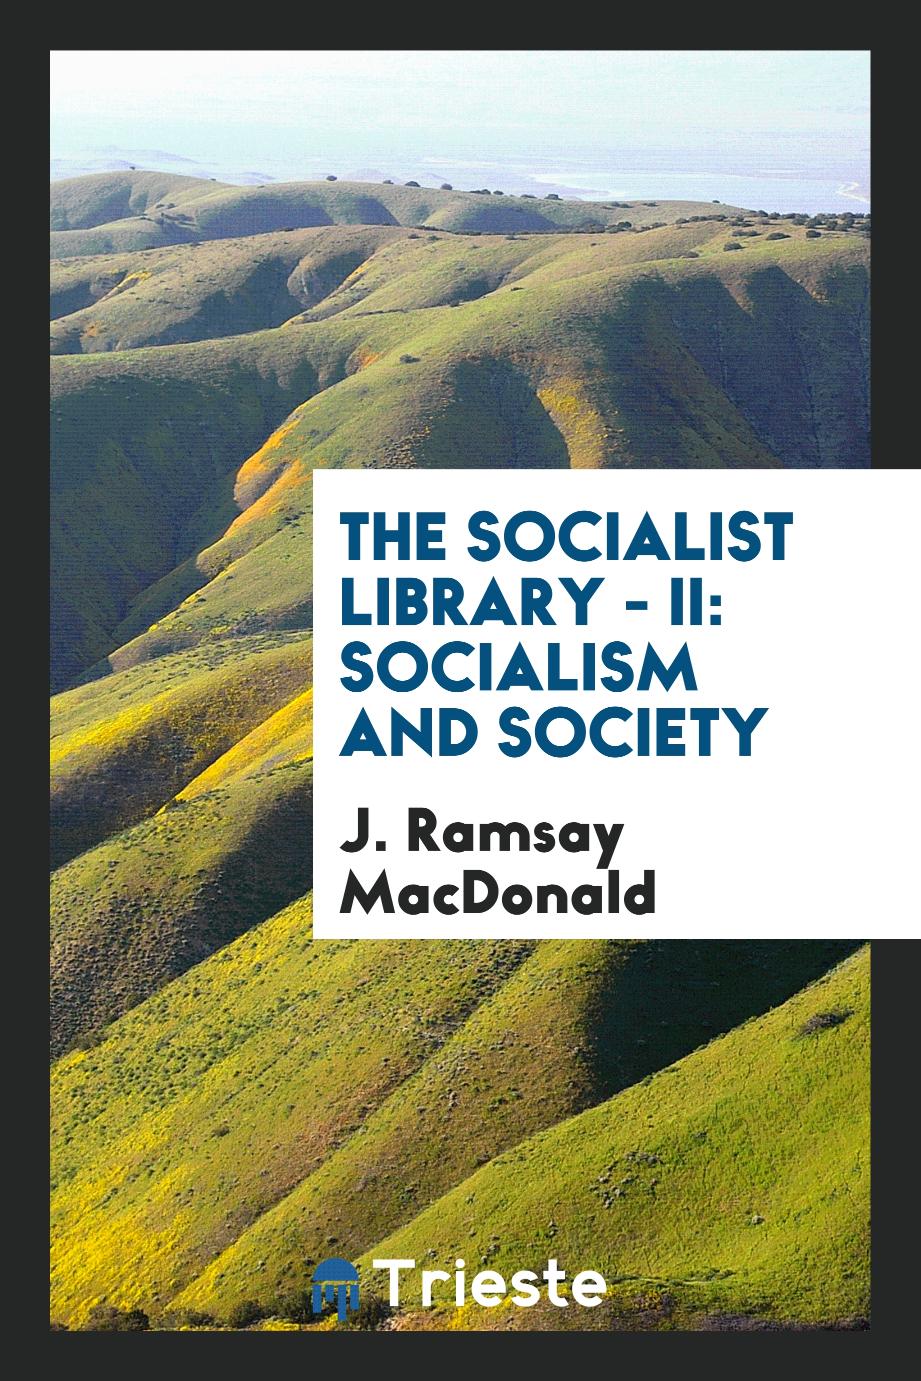 The Socialist Library - II: Socialism and society